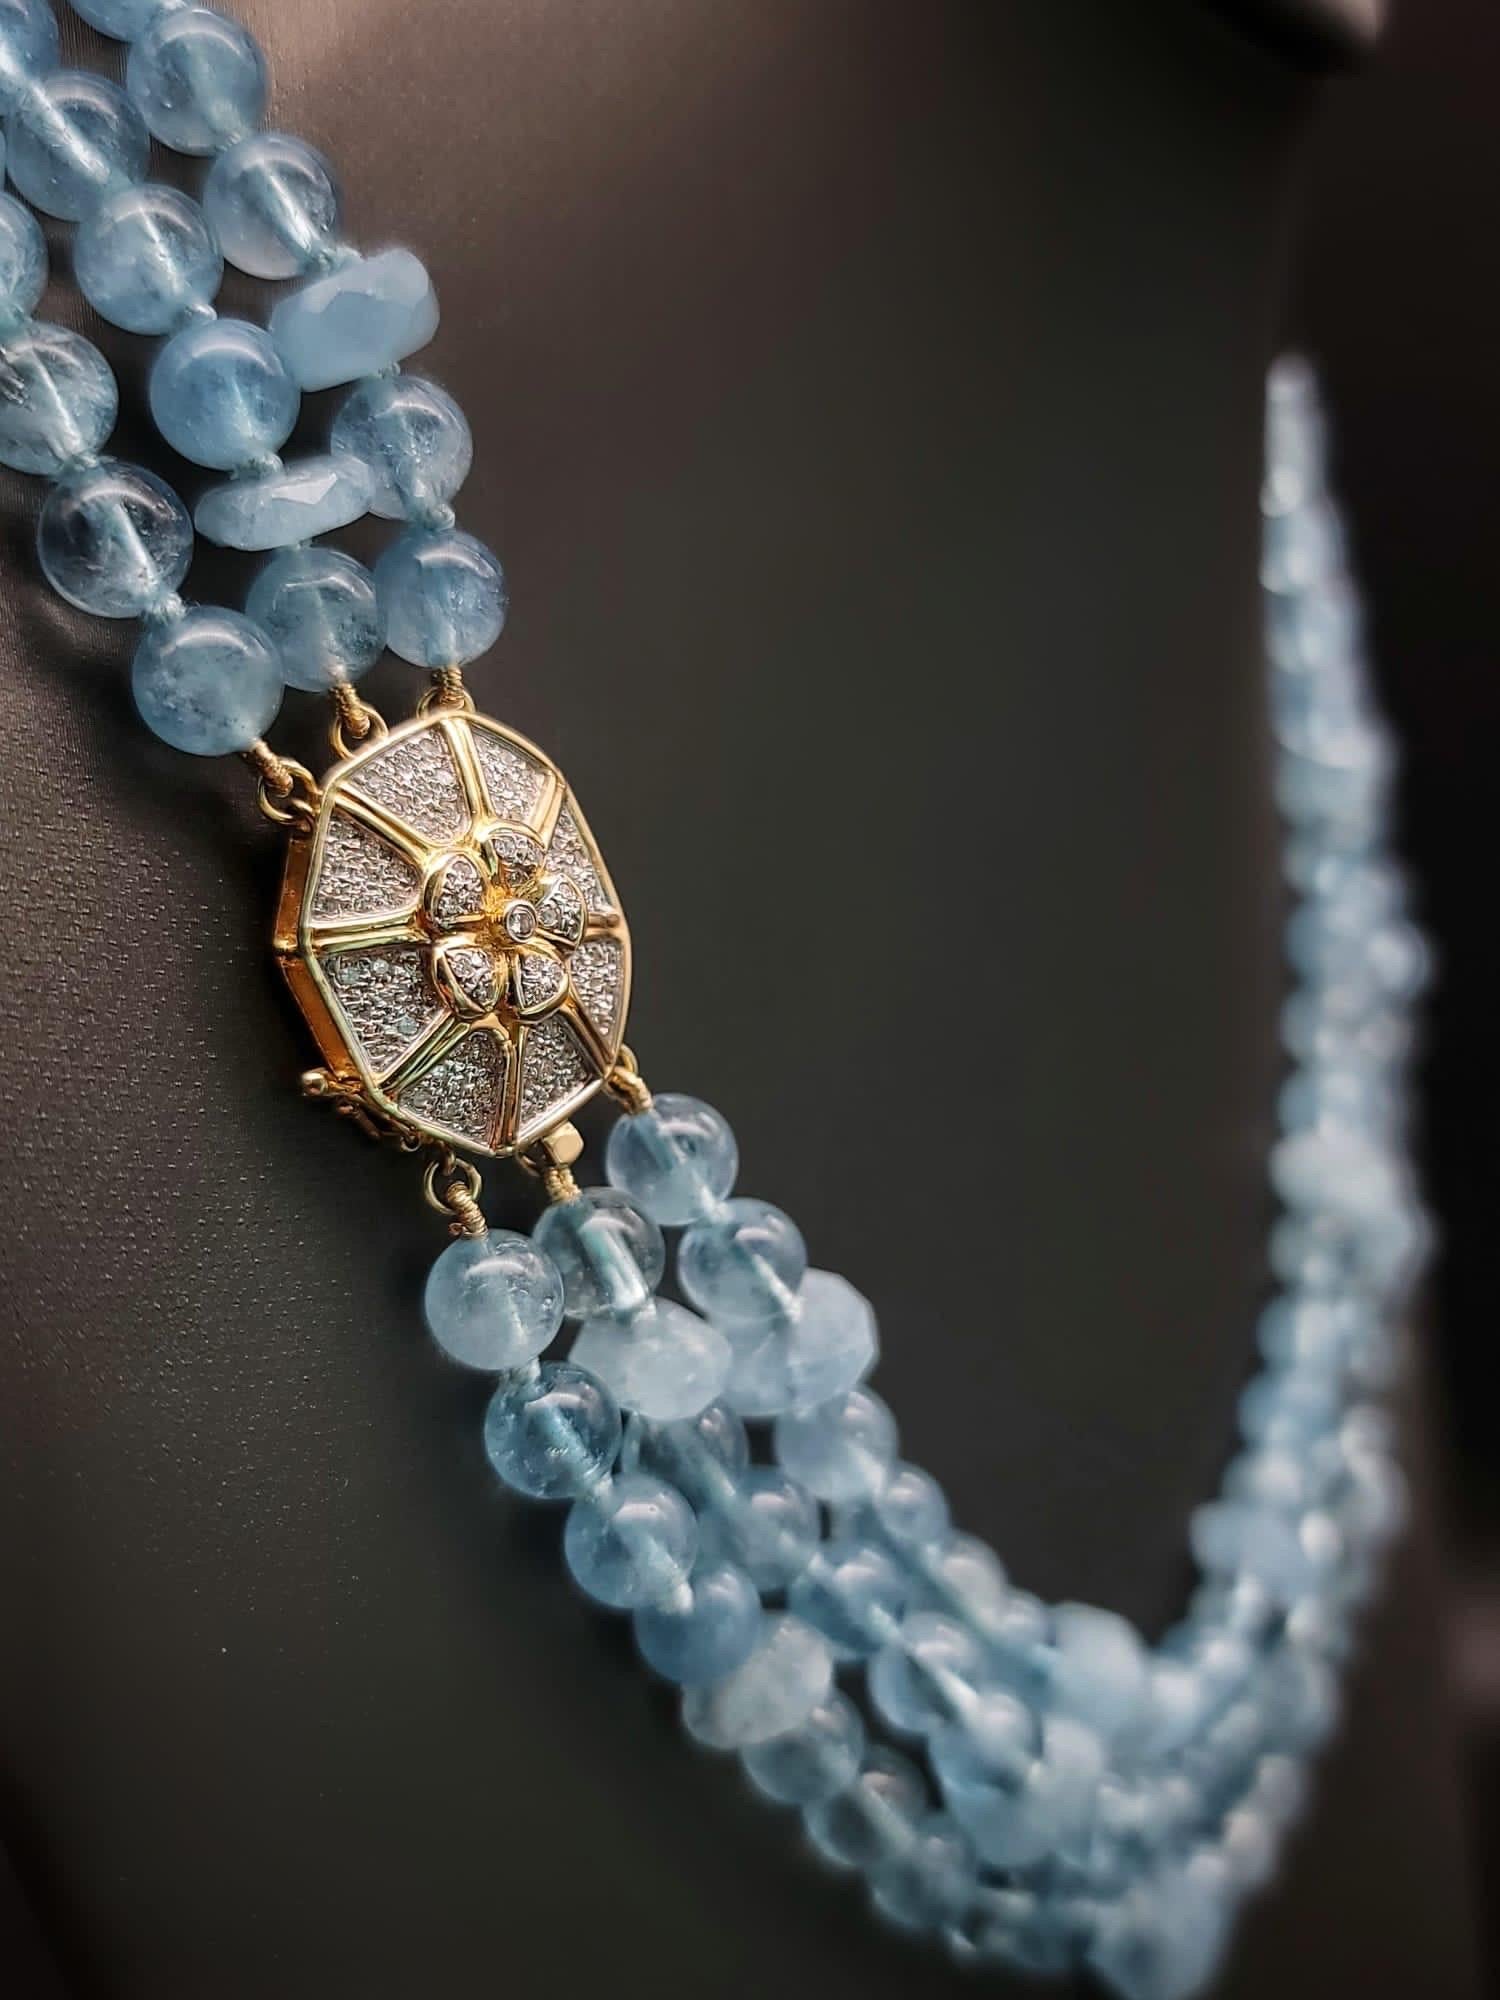 Contemporary A.Jeschel AAA Aquamarine necklace with a 14k Gold Diamond clasp.